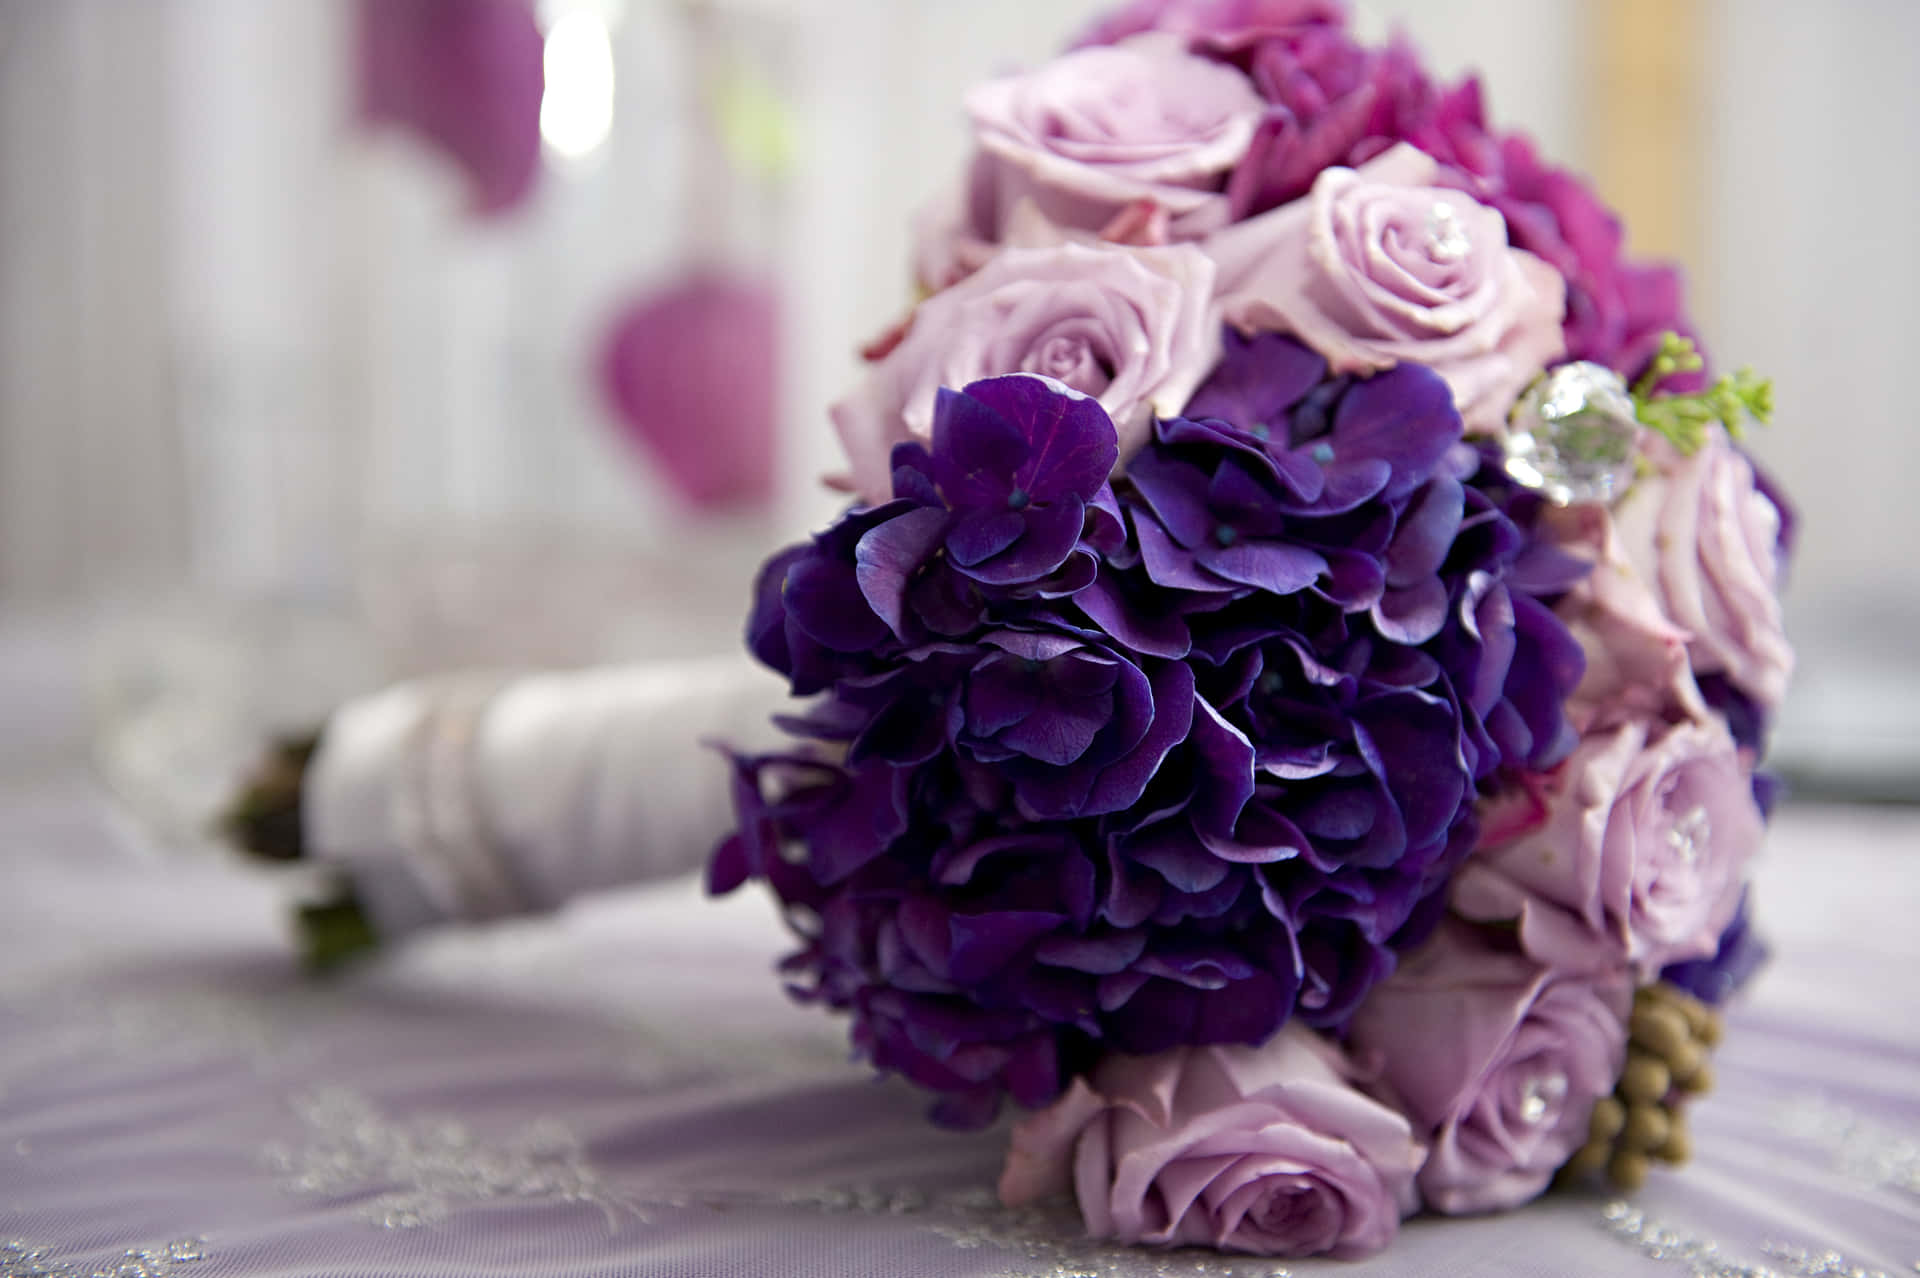 A beautiful and vibrant wedding bouquet resting on a table Wallpaper